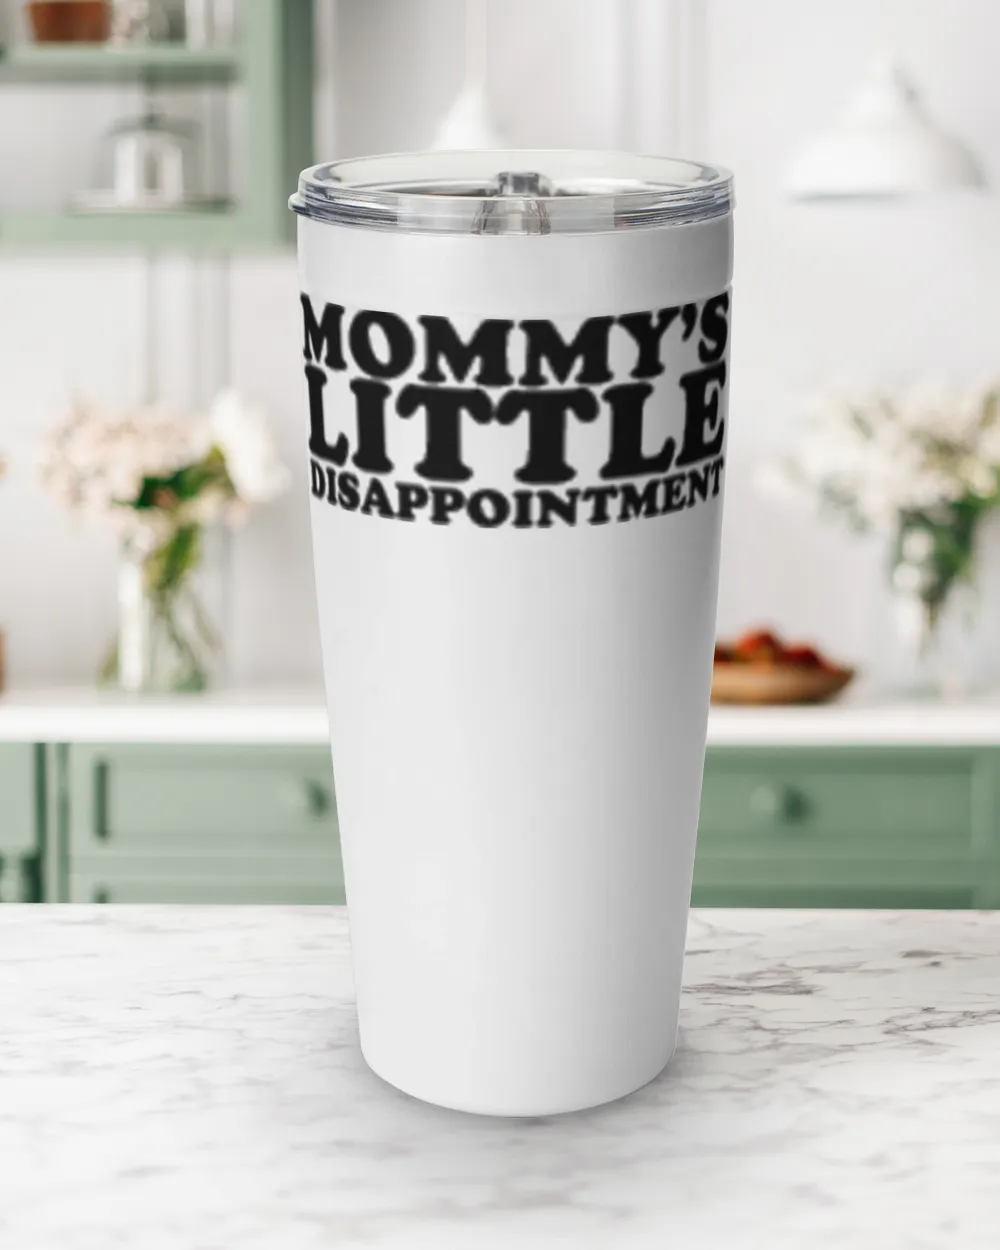 Mommy’s Little Disappointment Tee Shirt